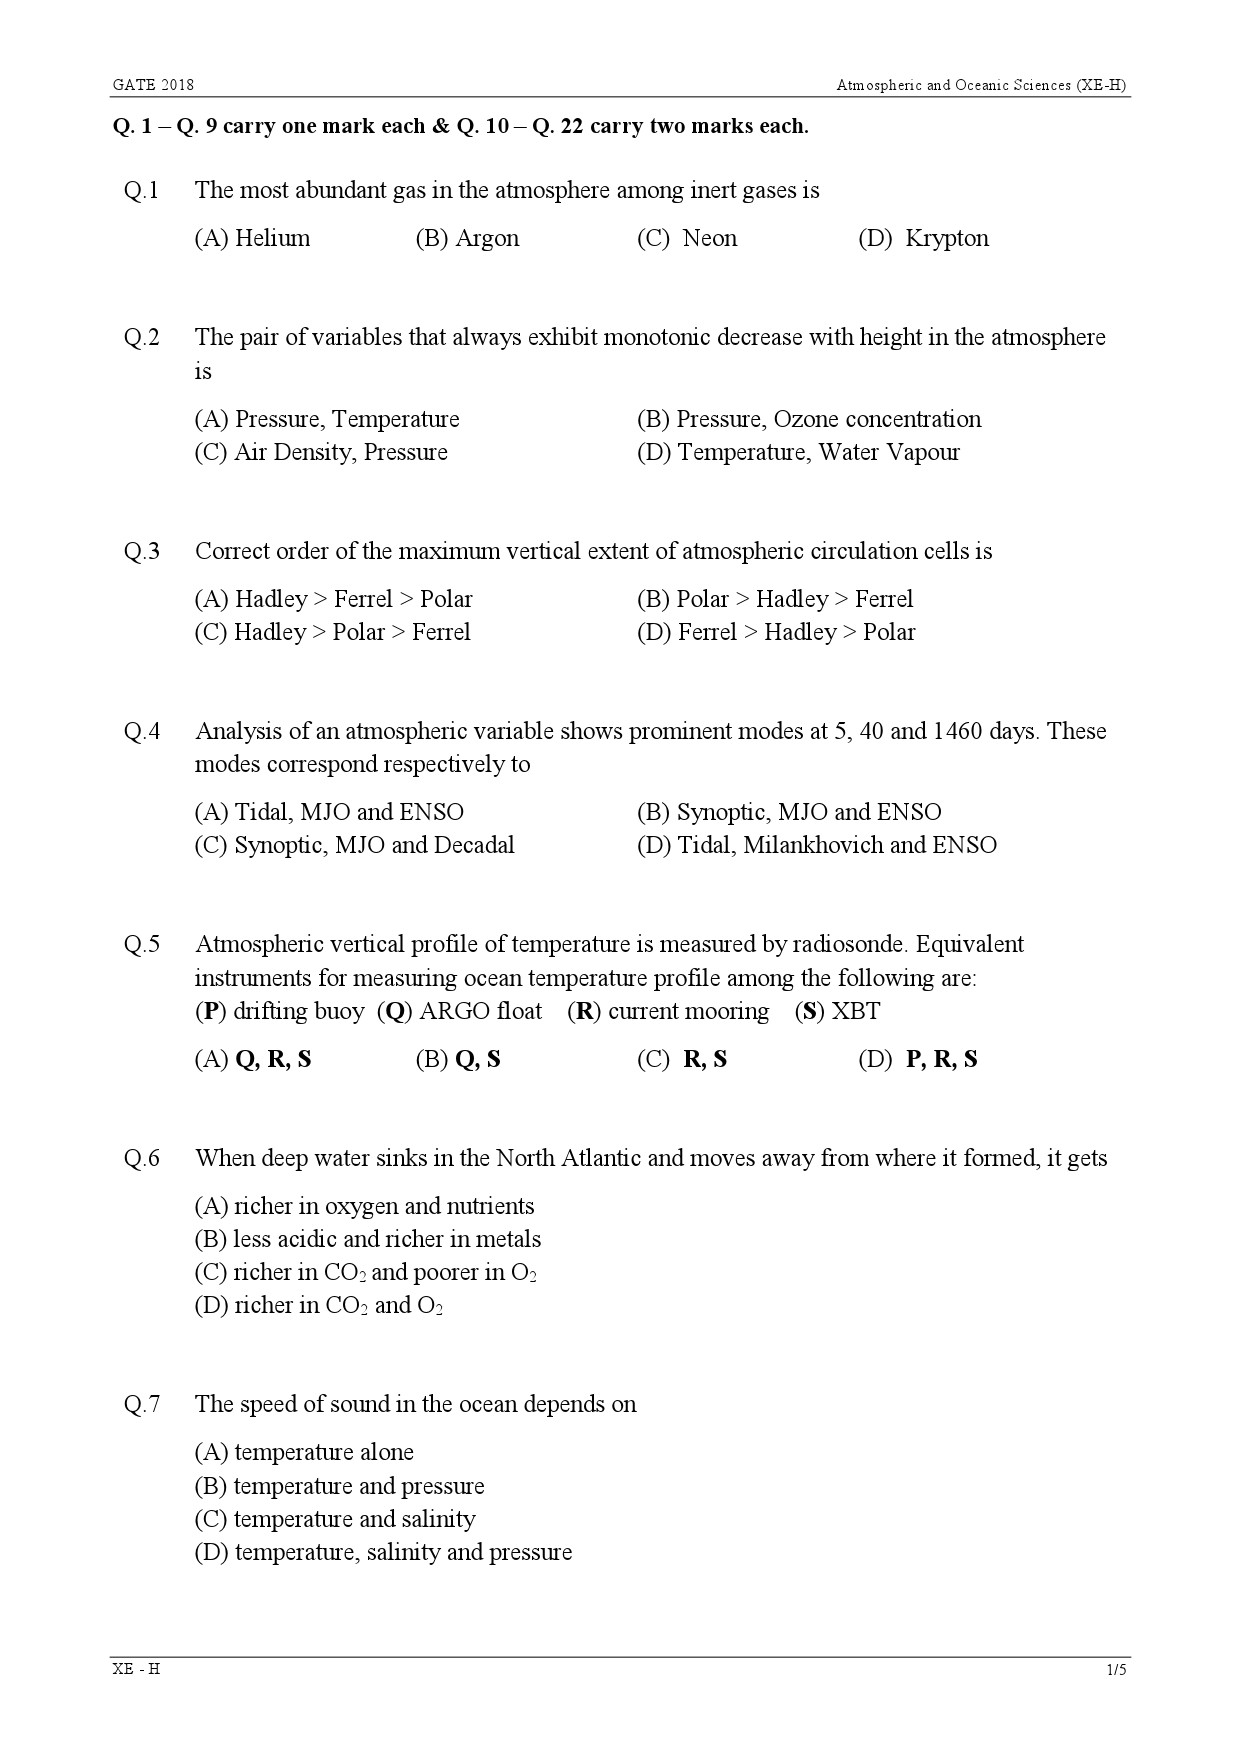 GATE Exam Question Paper 2018 Engineering Sciences 36